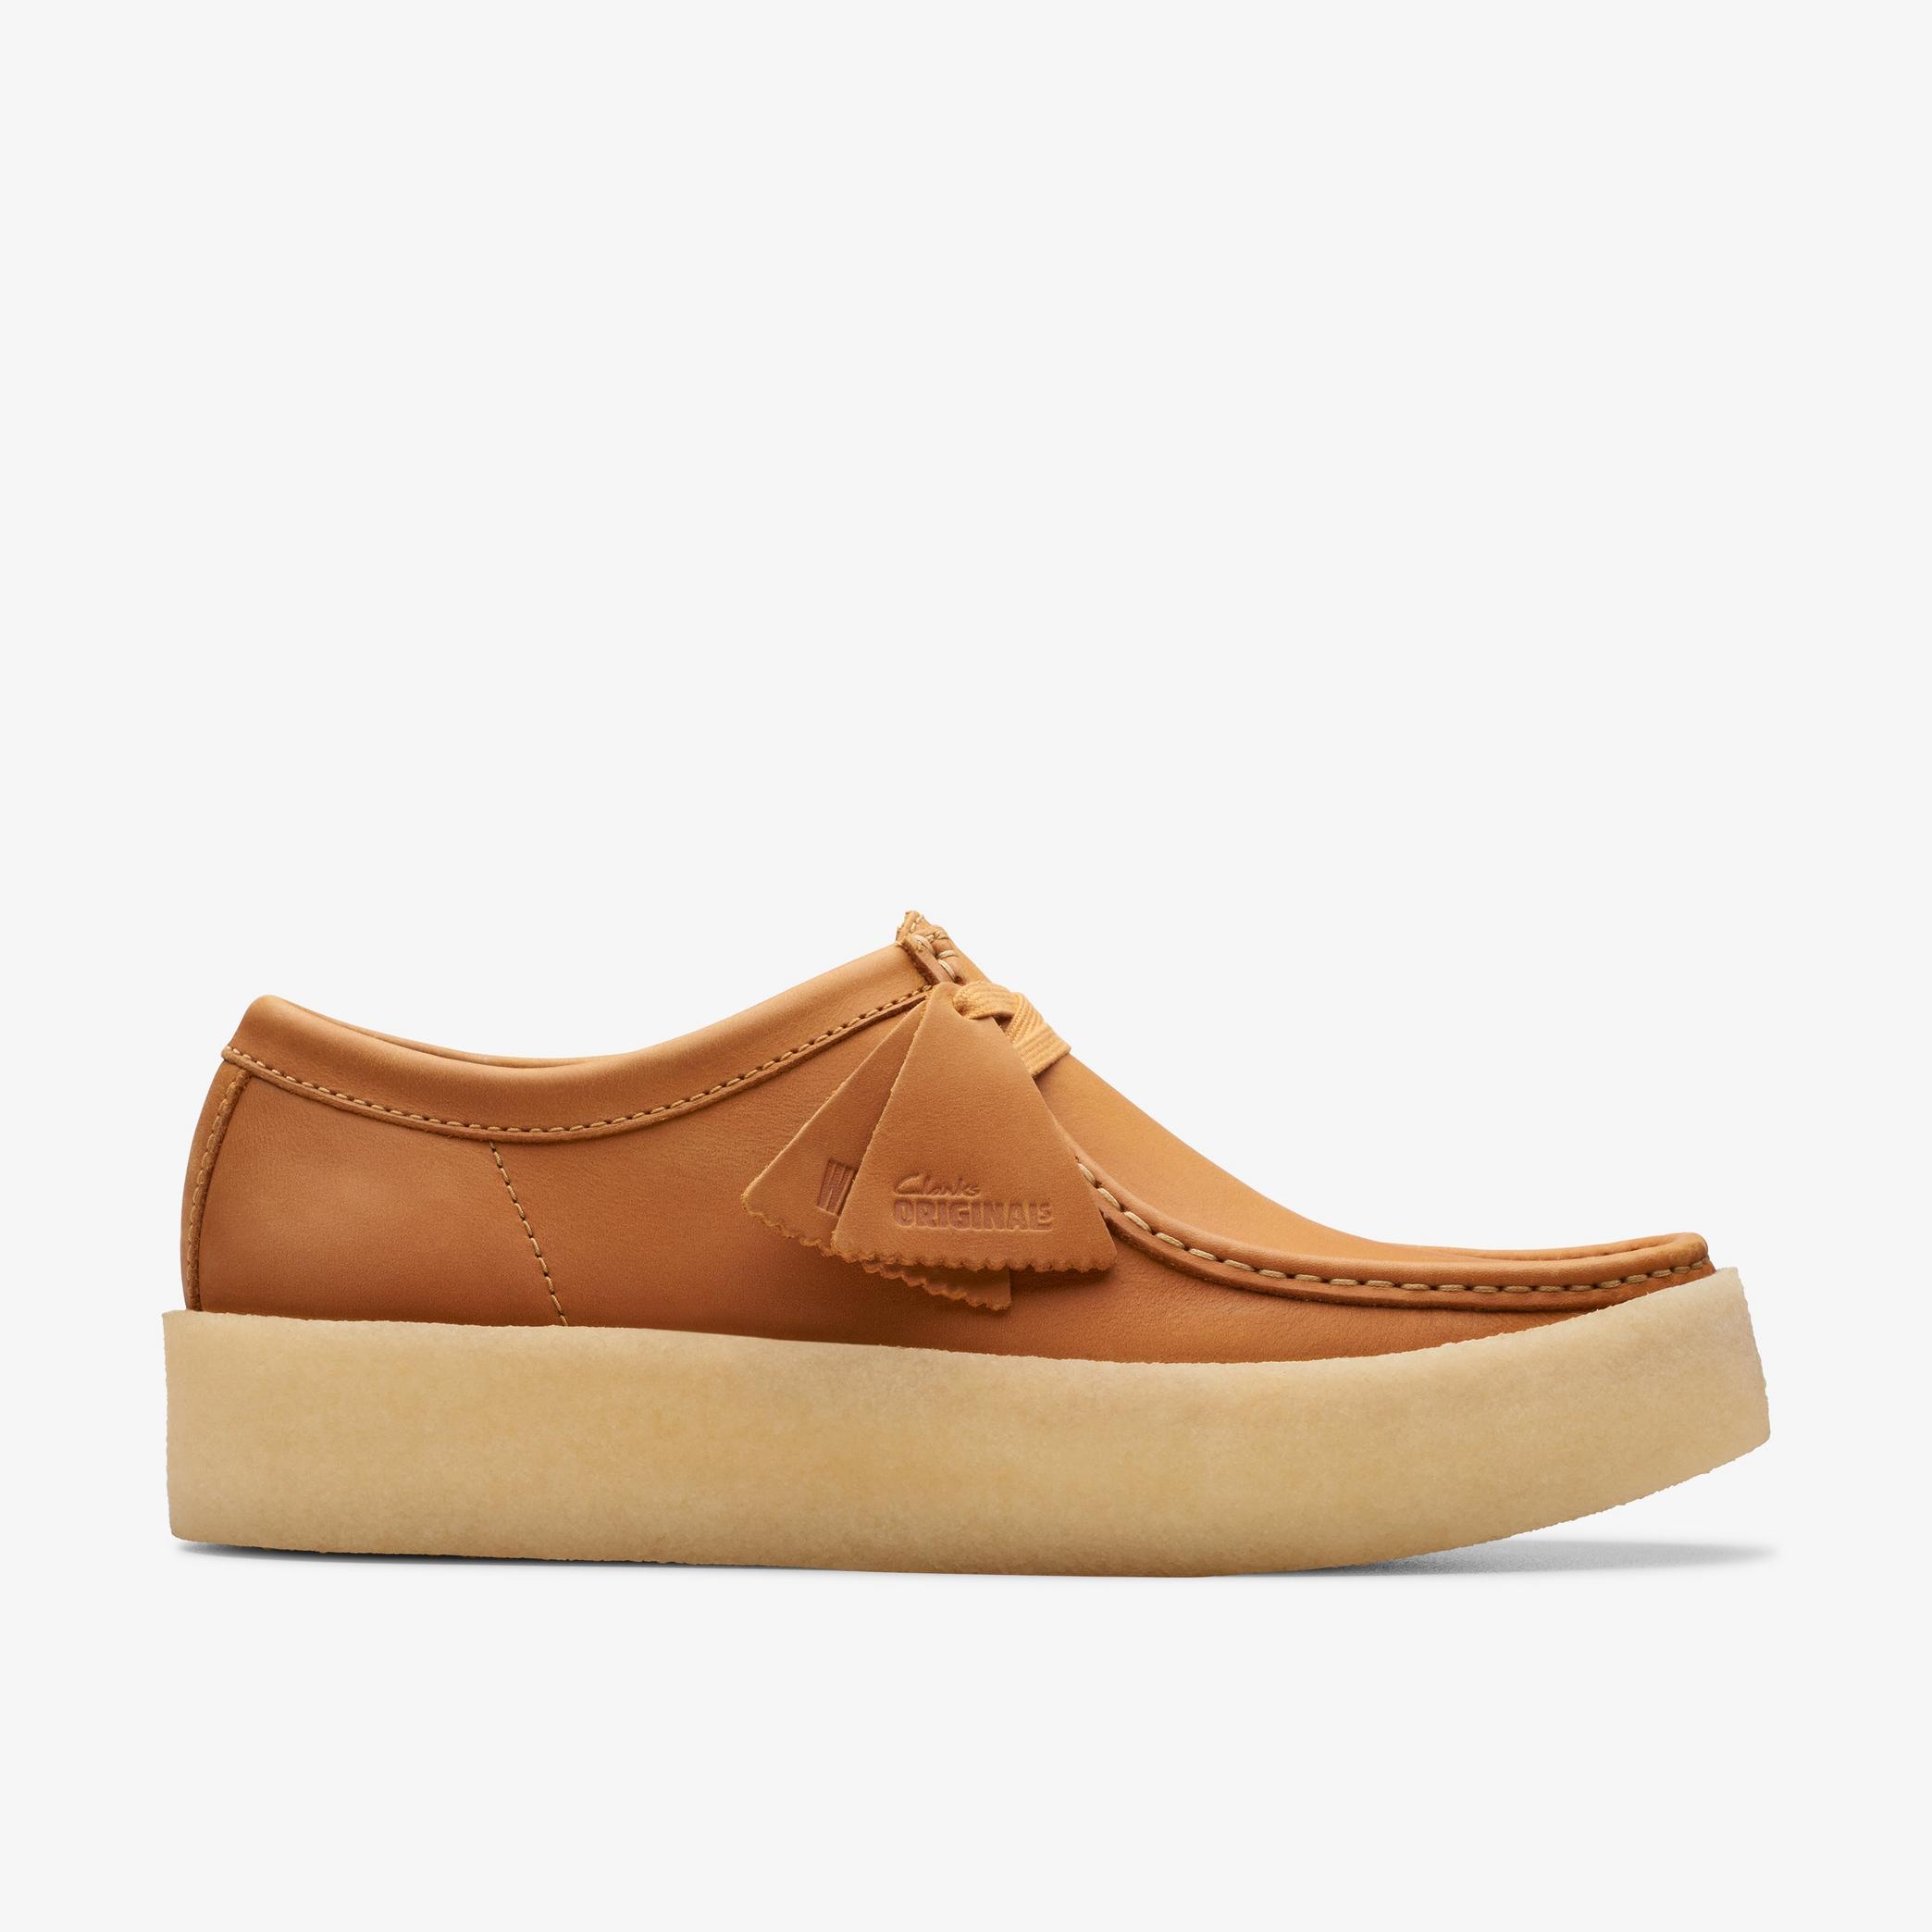 Wallabee Cup Mid Tan Leather Wallabee, view 1 of 6